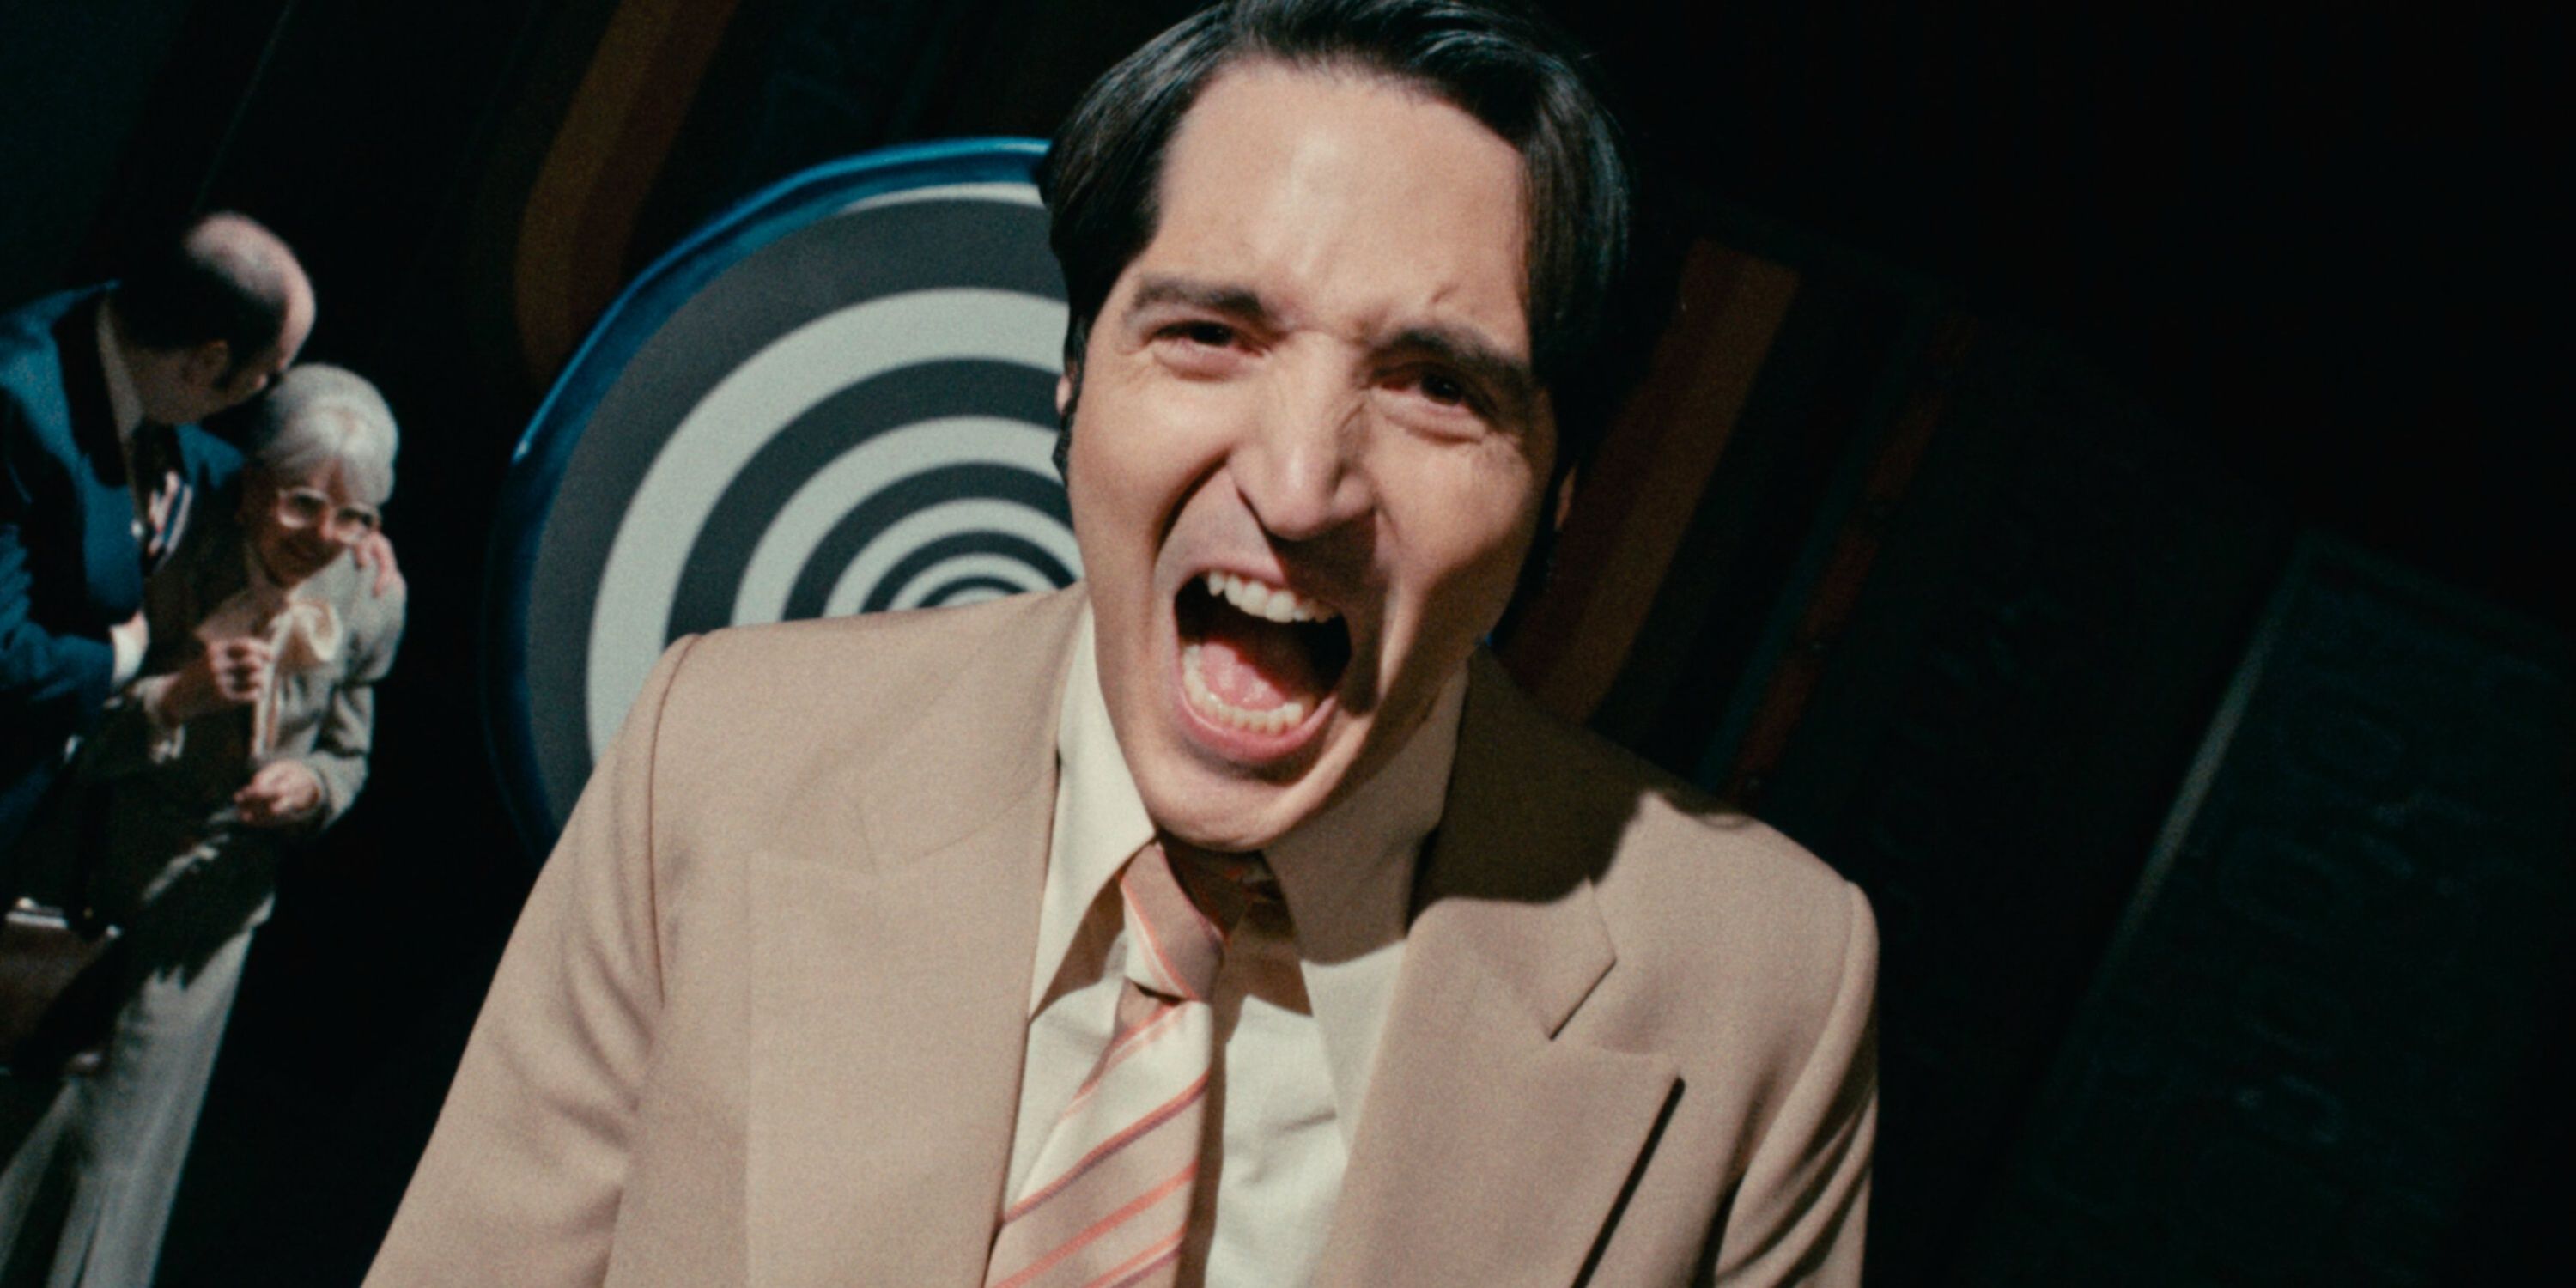 David Dastmalchian laughs as Jack Delroy, the television host featured in Late Night with the Devil